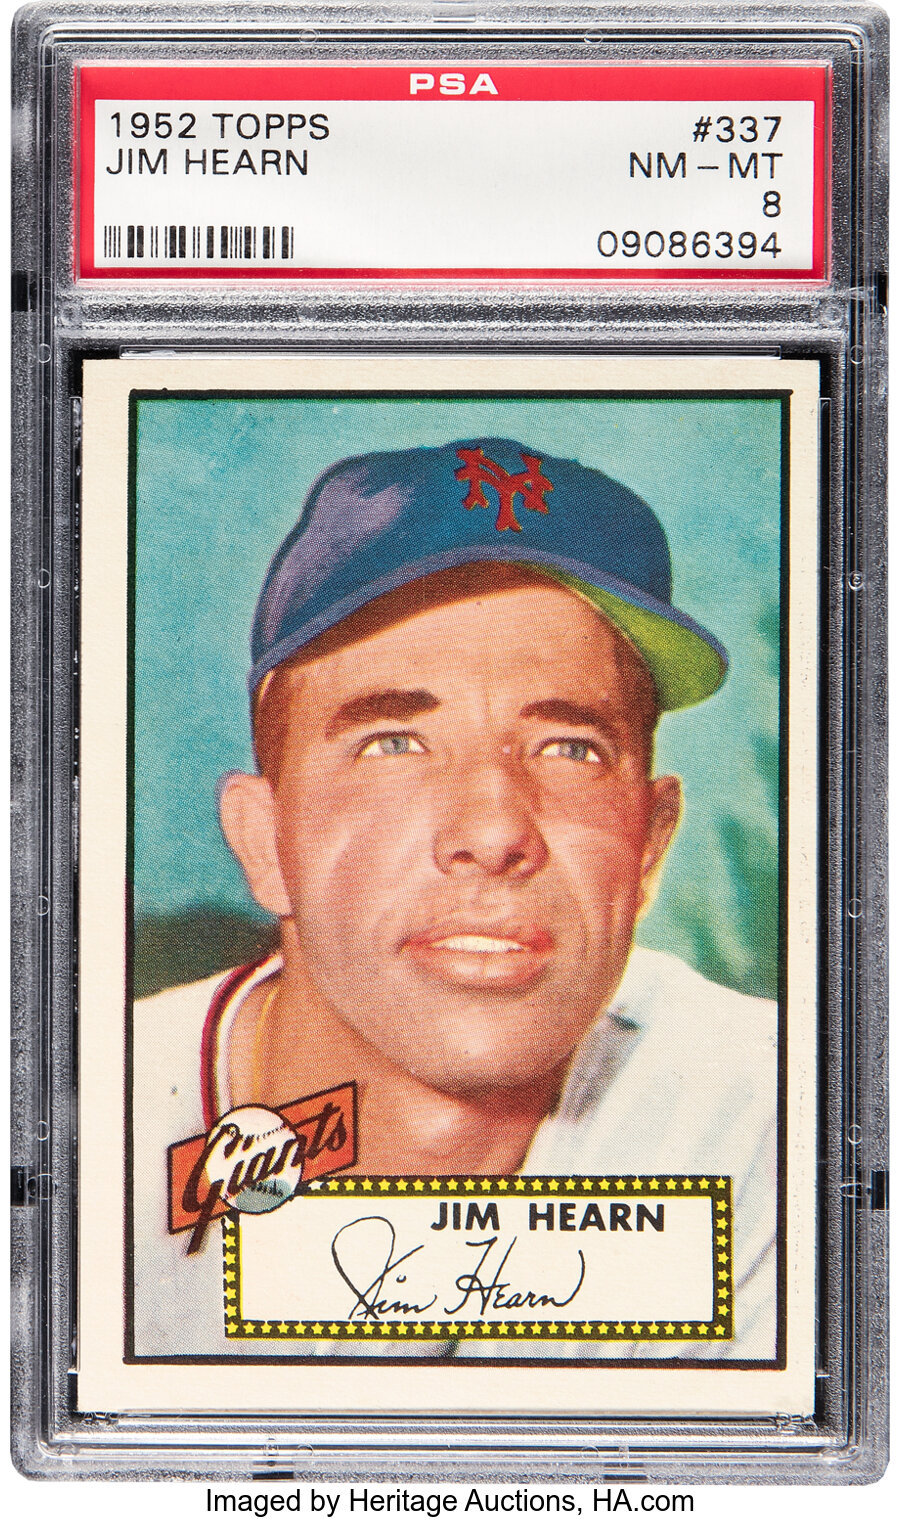 1952 Topps Jim Hearn #337 PSA NM-MT 8 - Only One Higher!